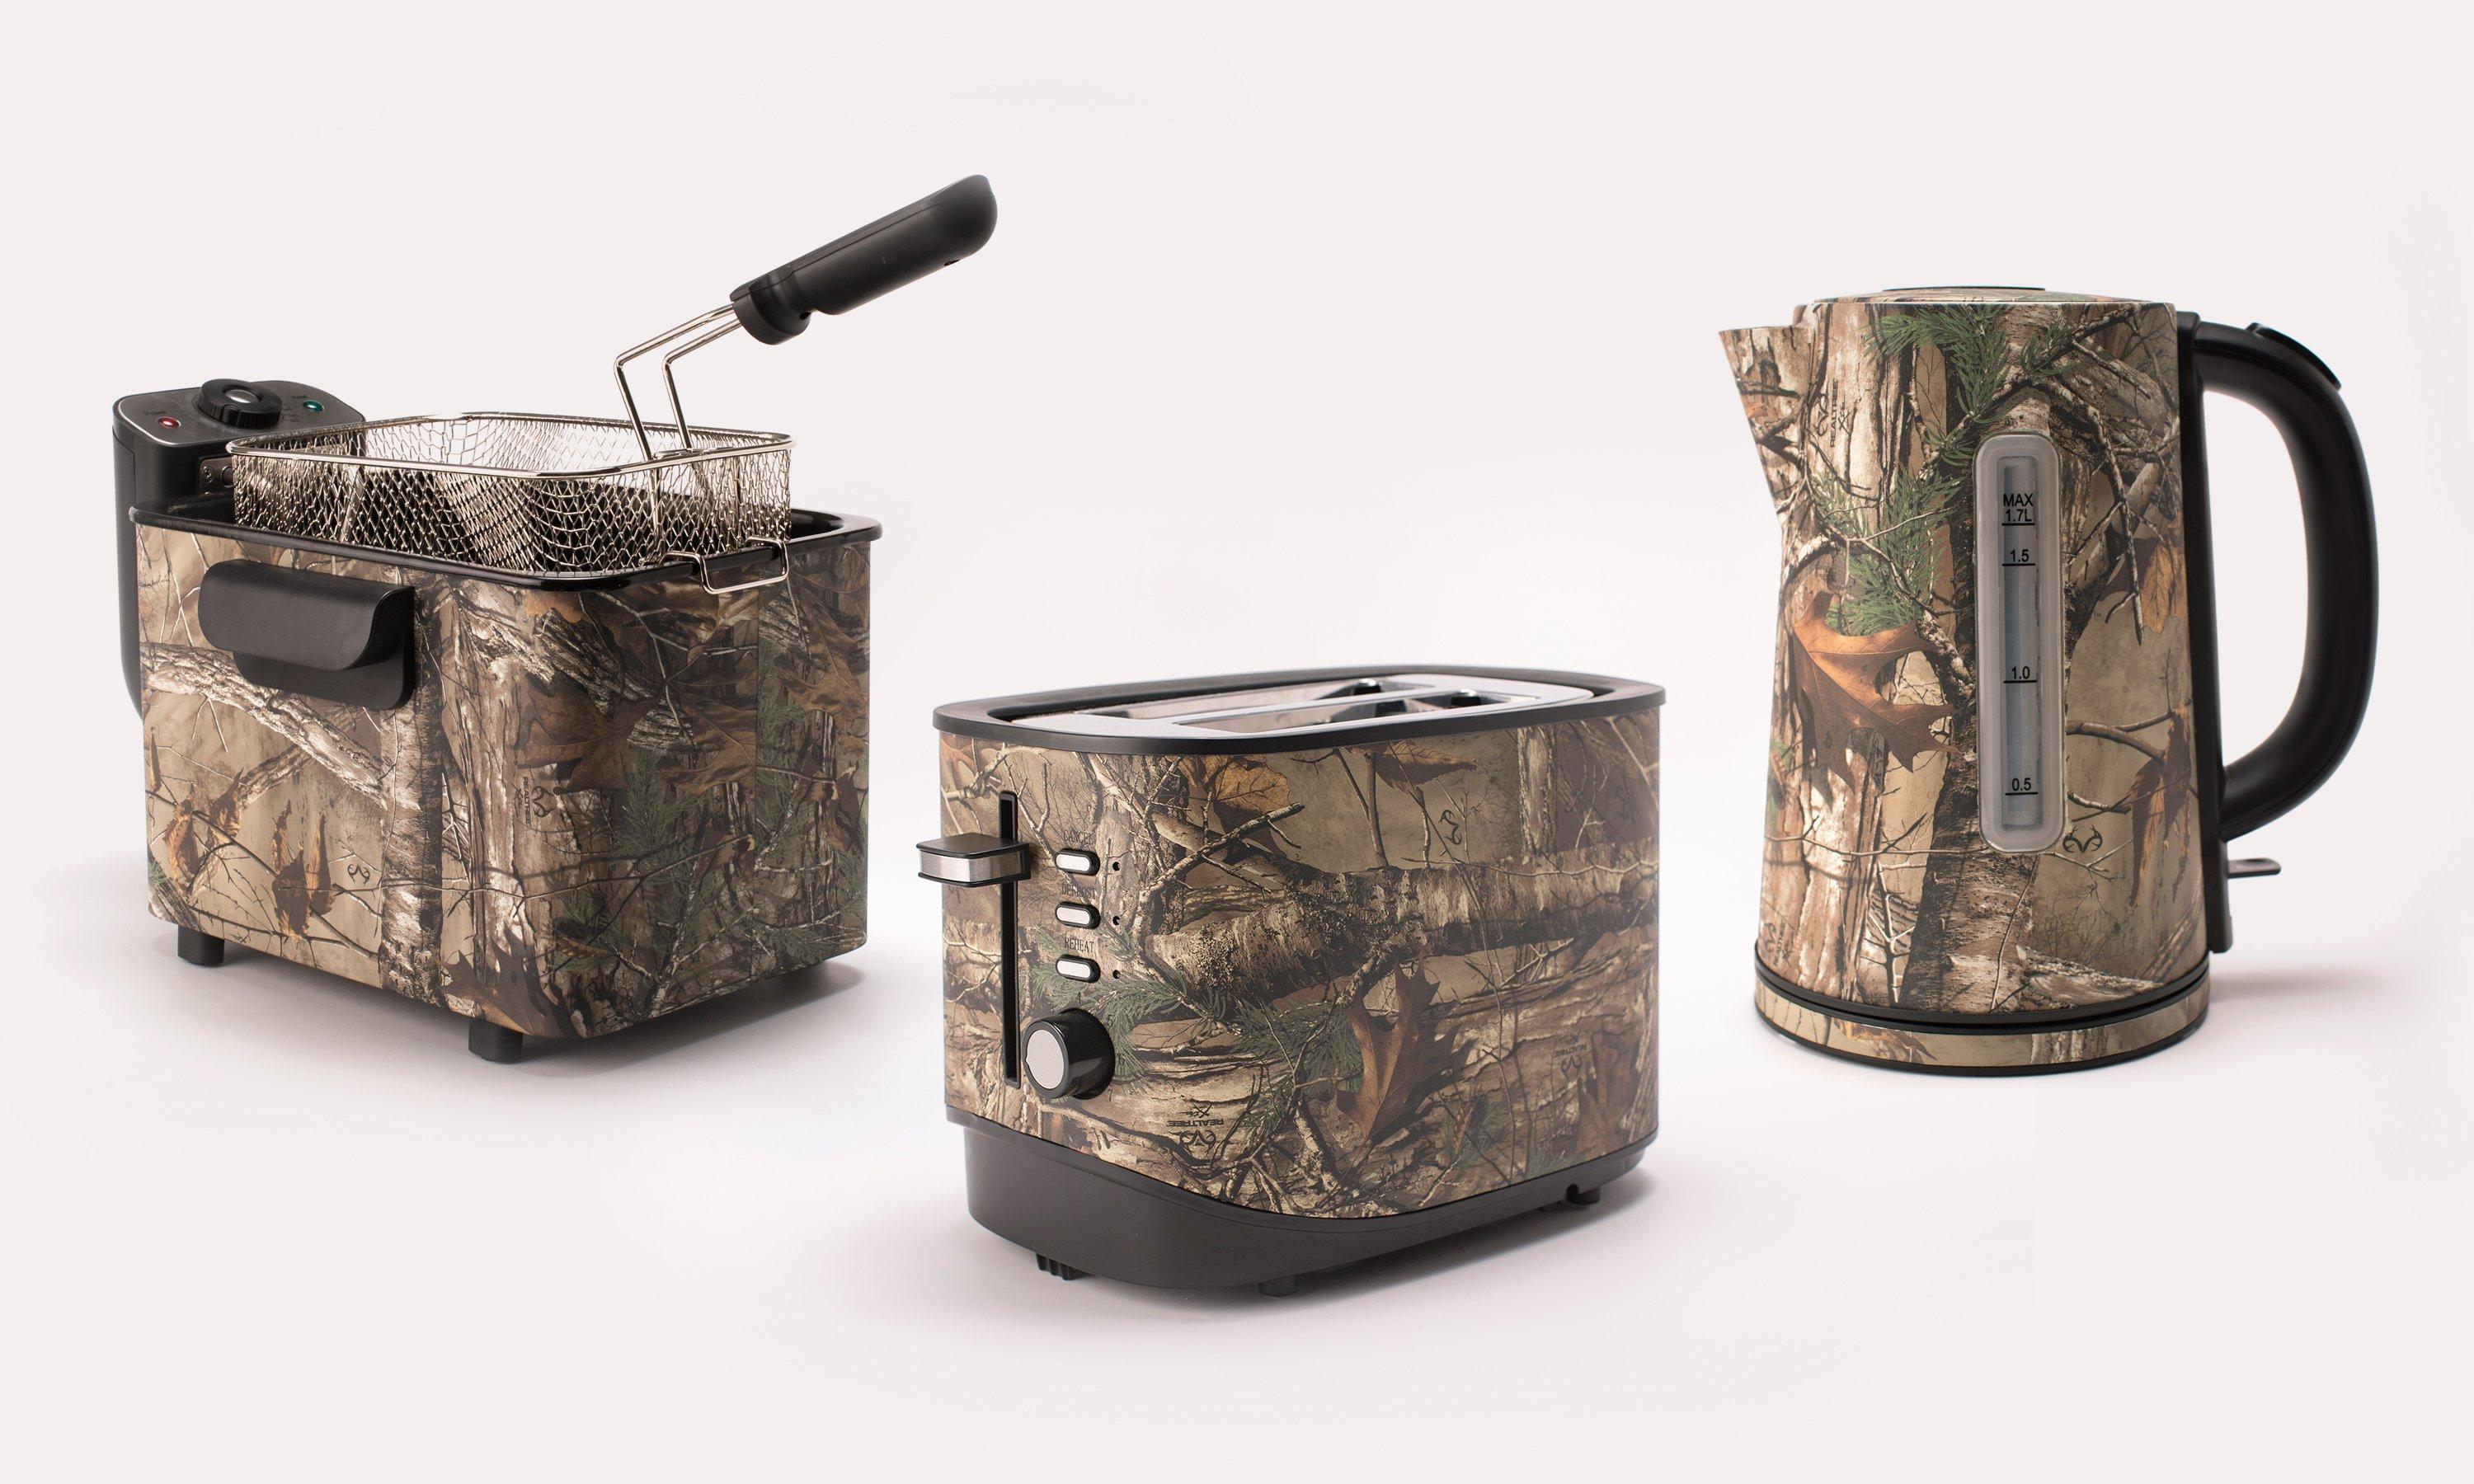 The new Realtree line from Magic Chef comes with just about any kitchen appliance you may need.